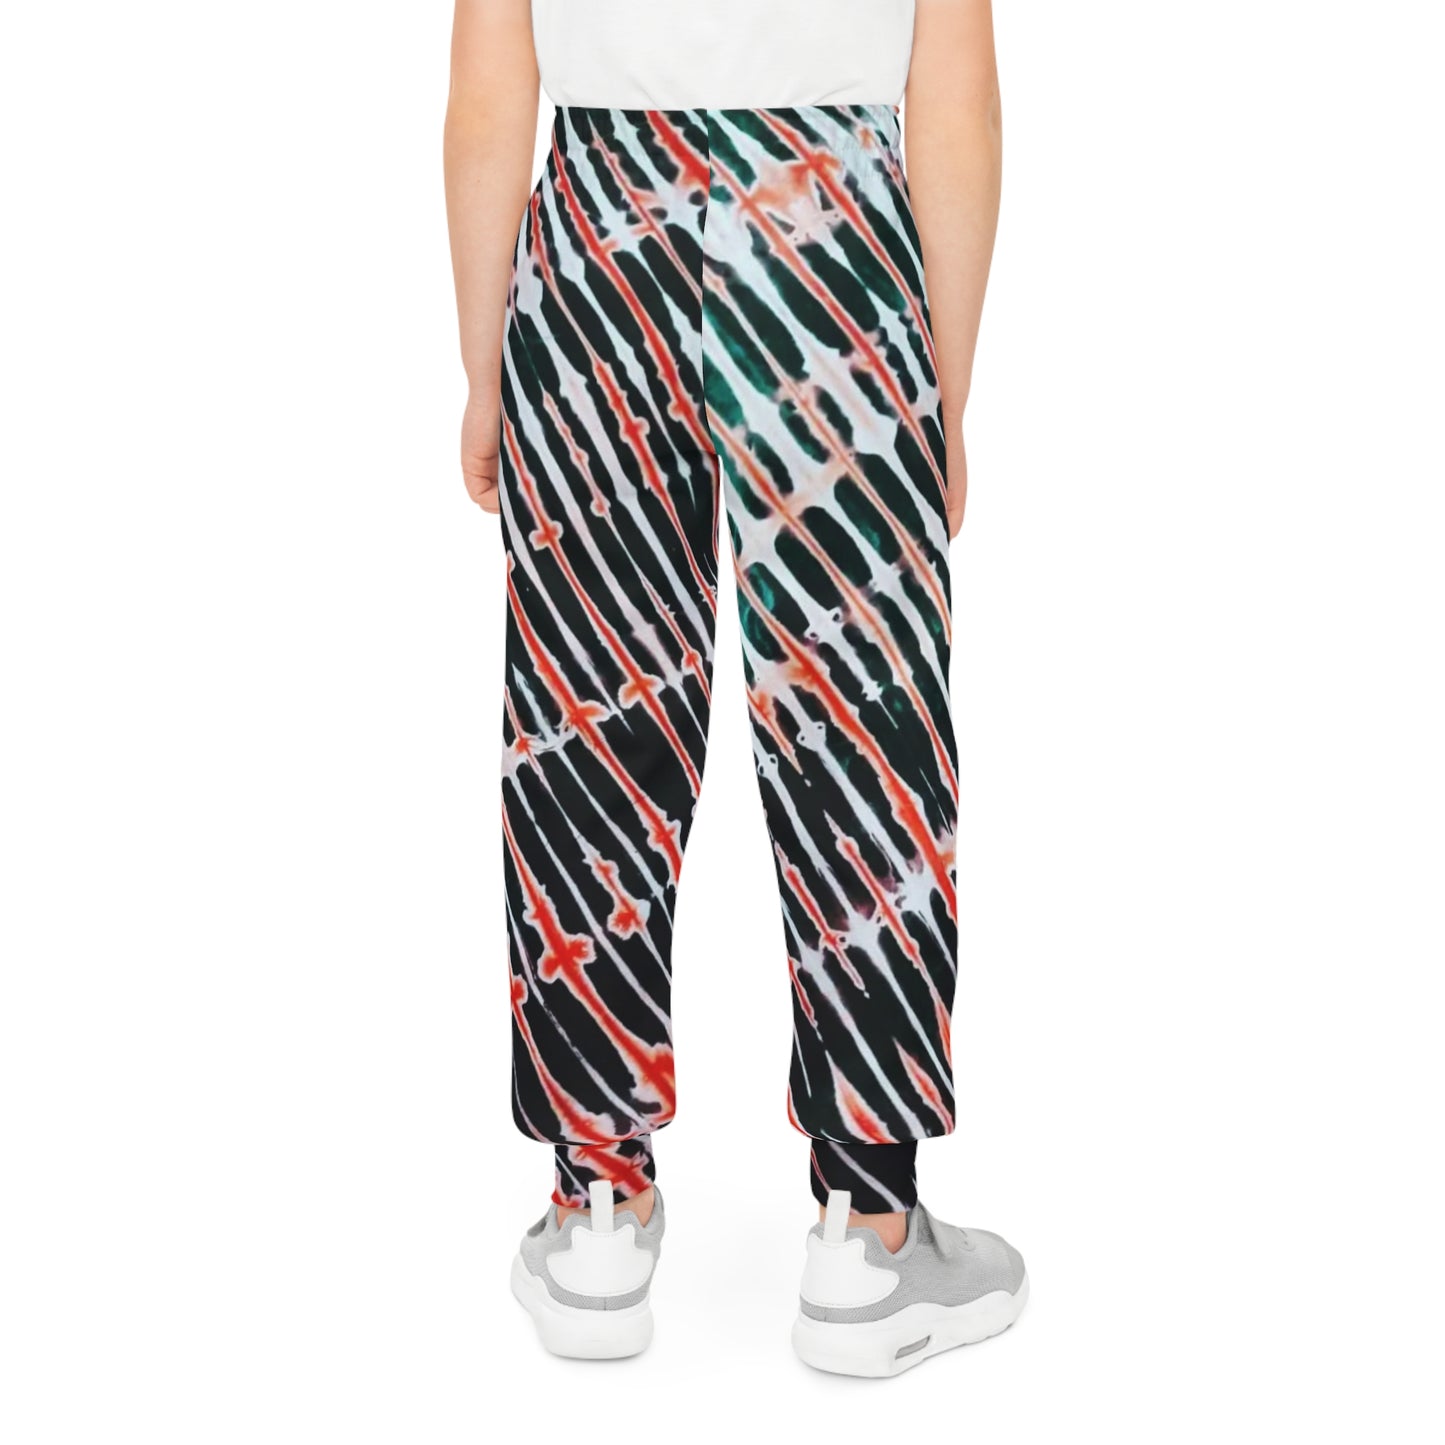 Paths Youth Joggers